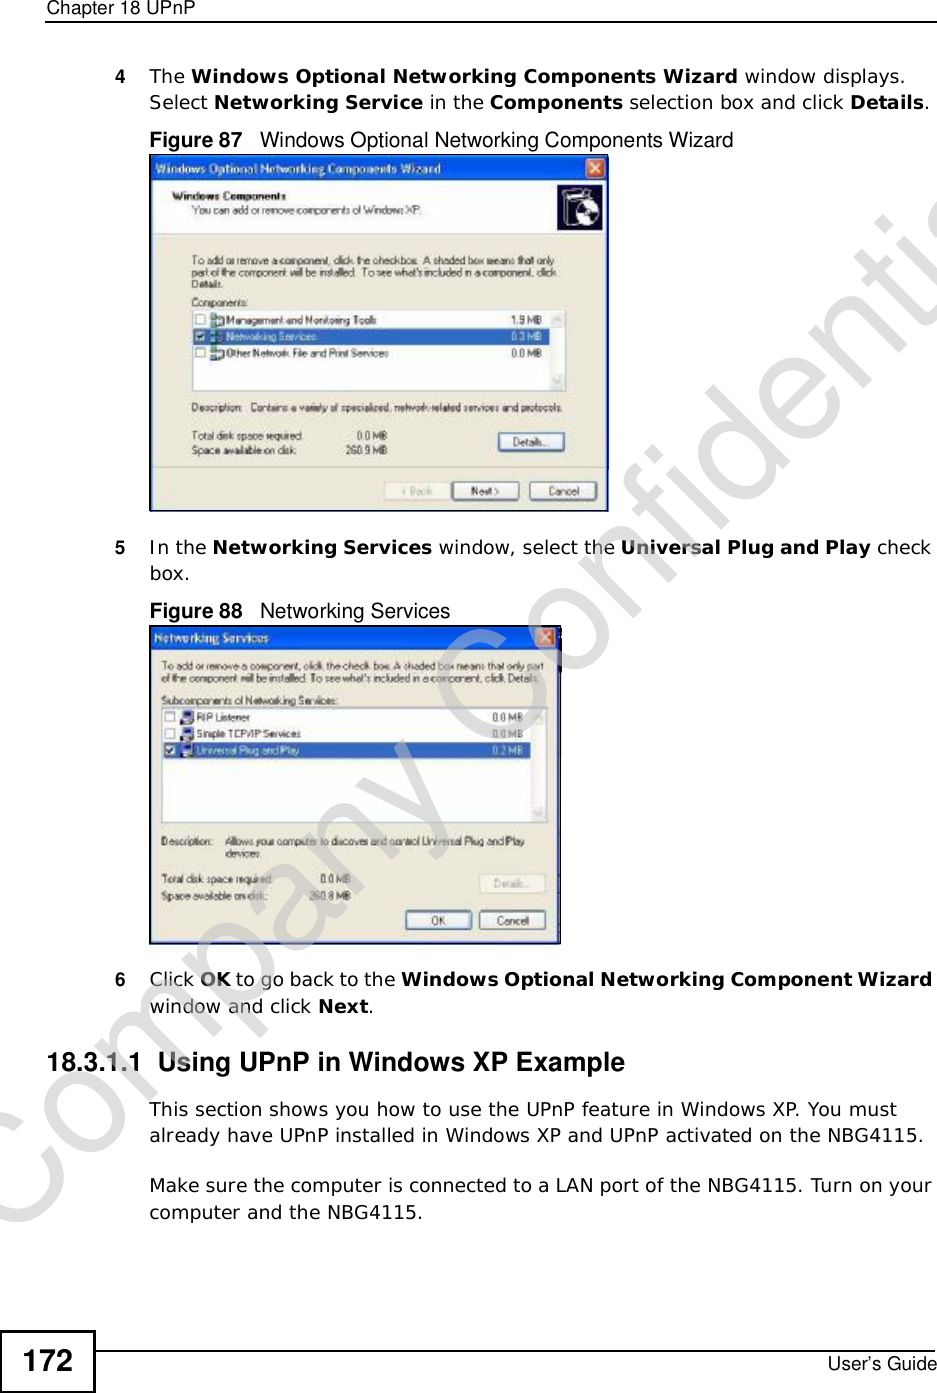 Chapter 18UPnPUser’s Guide1724The Windows Optional Networking Components Wizard window displays. Select Networking Service in the Components selection box and click Details.Figure 87   Windows Optional Networking Components Wizard5In the Networking Services window, select the Universal Plug and Play check box. Figure 88   Networking Services6Click OK to go back to the Windows Optional Networking Component Wizard window and click Next.18.3.1.1  Using UPnP in Windows XP ExampleThis section shows you how to use the UPnP feature in Windows XP. You must already have UPnP installed in Windows XP and UPnP activated on the NBG4115.Make sure the computer is connected to a LAN port of the NBG4115. Turn on your computer and the NBG4115. Company Confidential